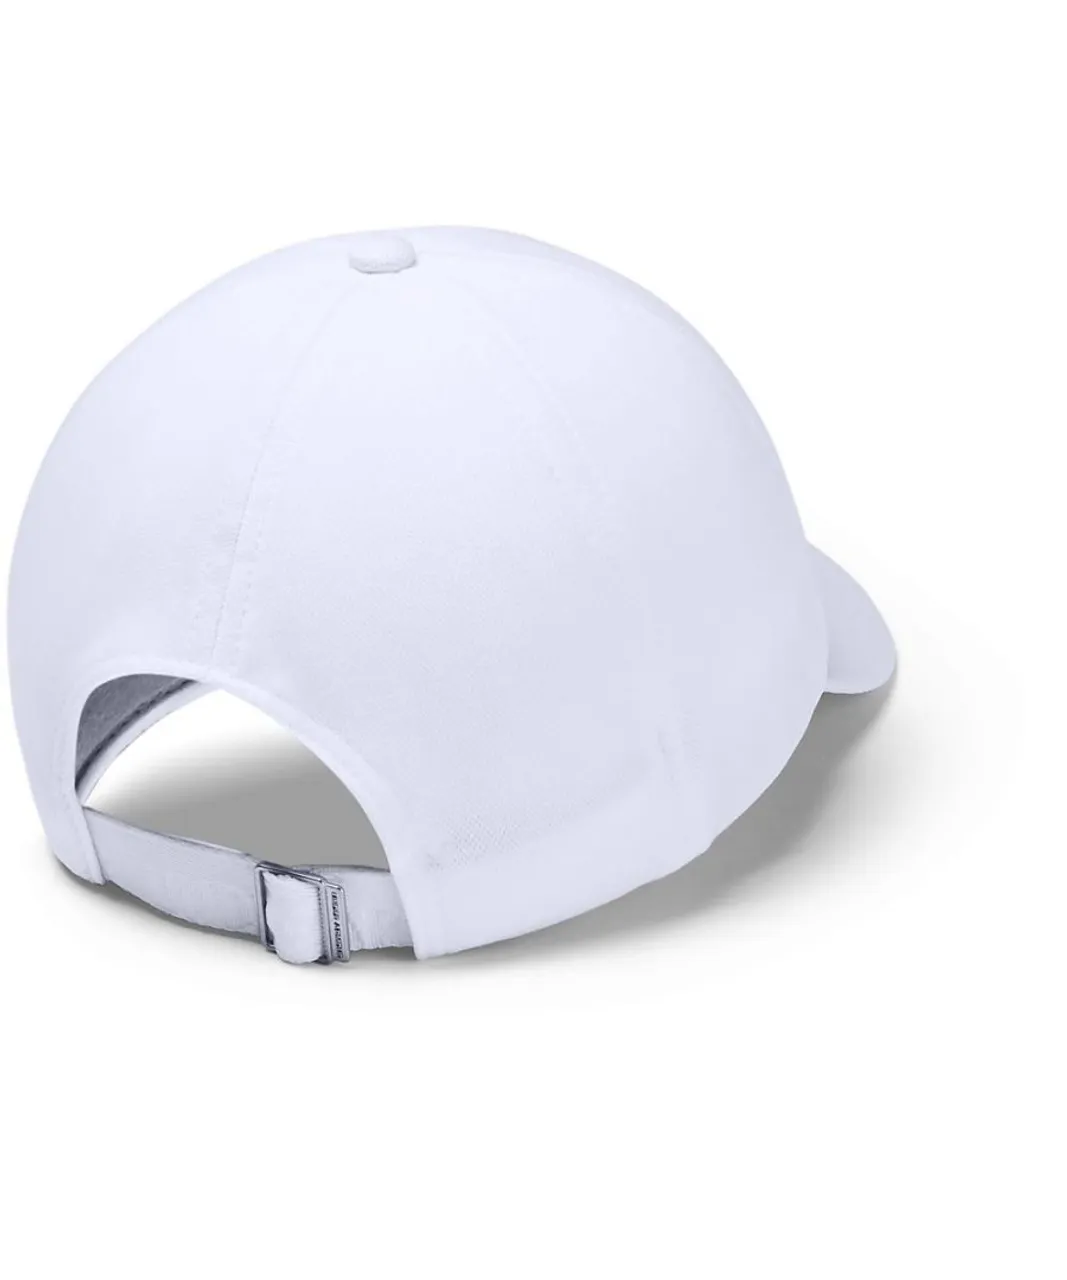 Under Armour Womens Accessories UA Play Up Cap in White - One